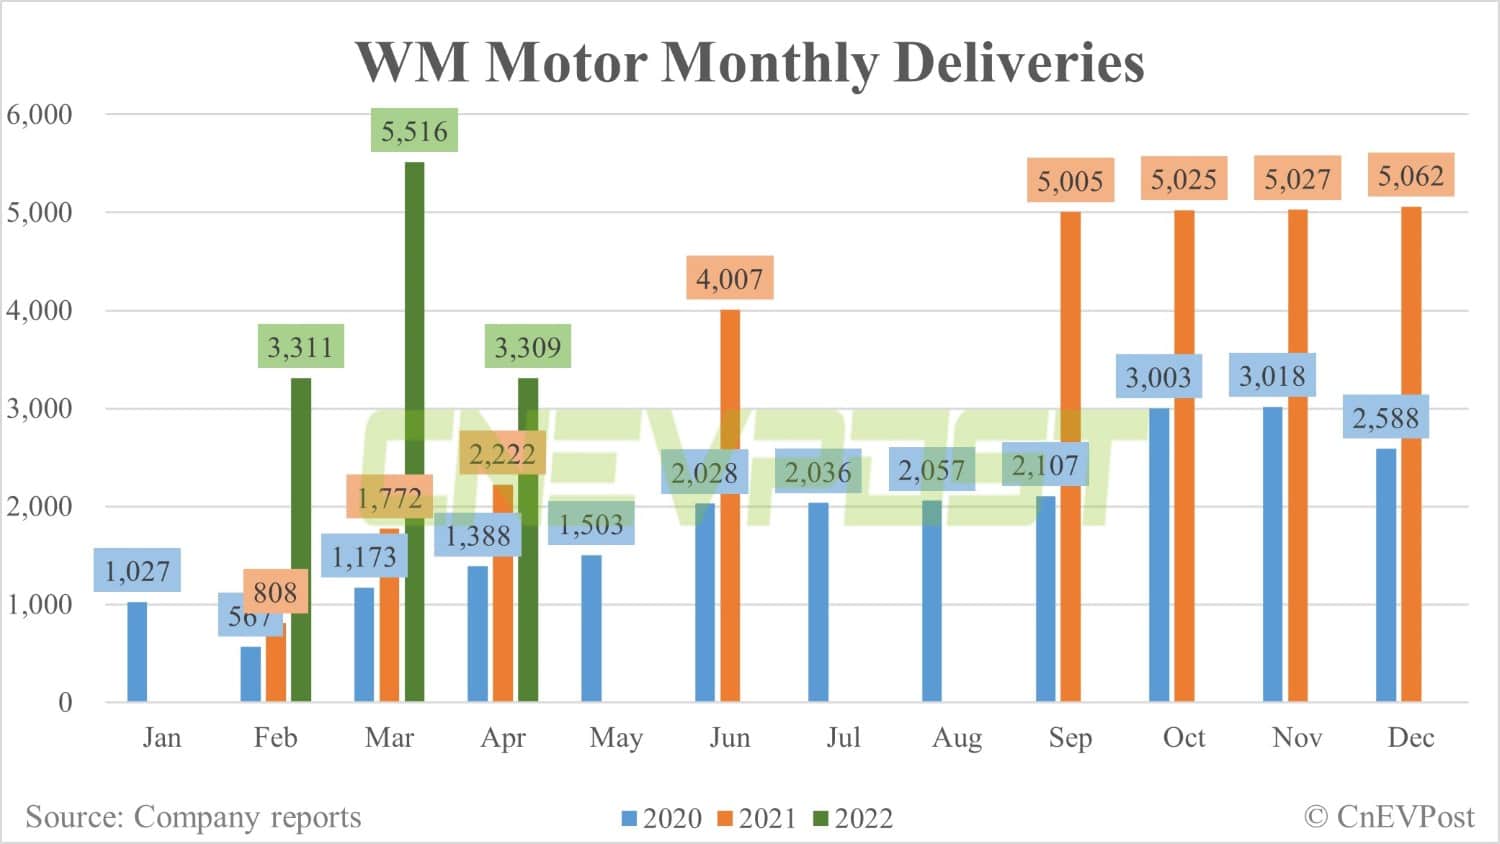 WM Motor delivers 3,309 vehicles in April, down 40% from March-CnEVPost